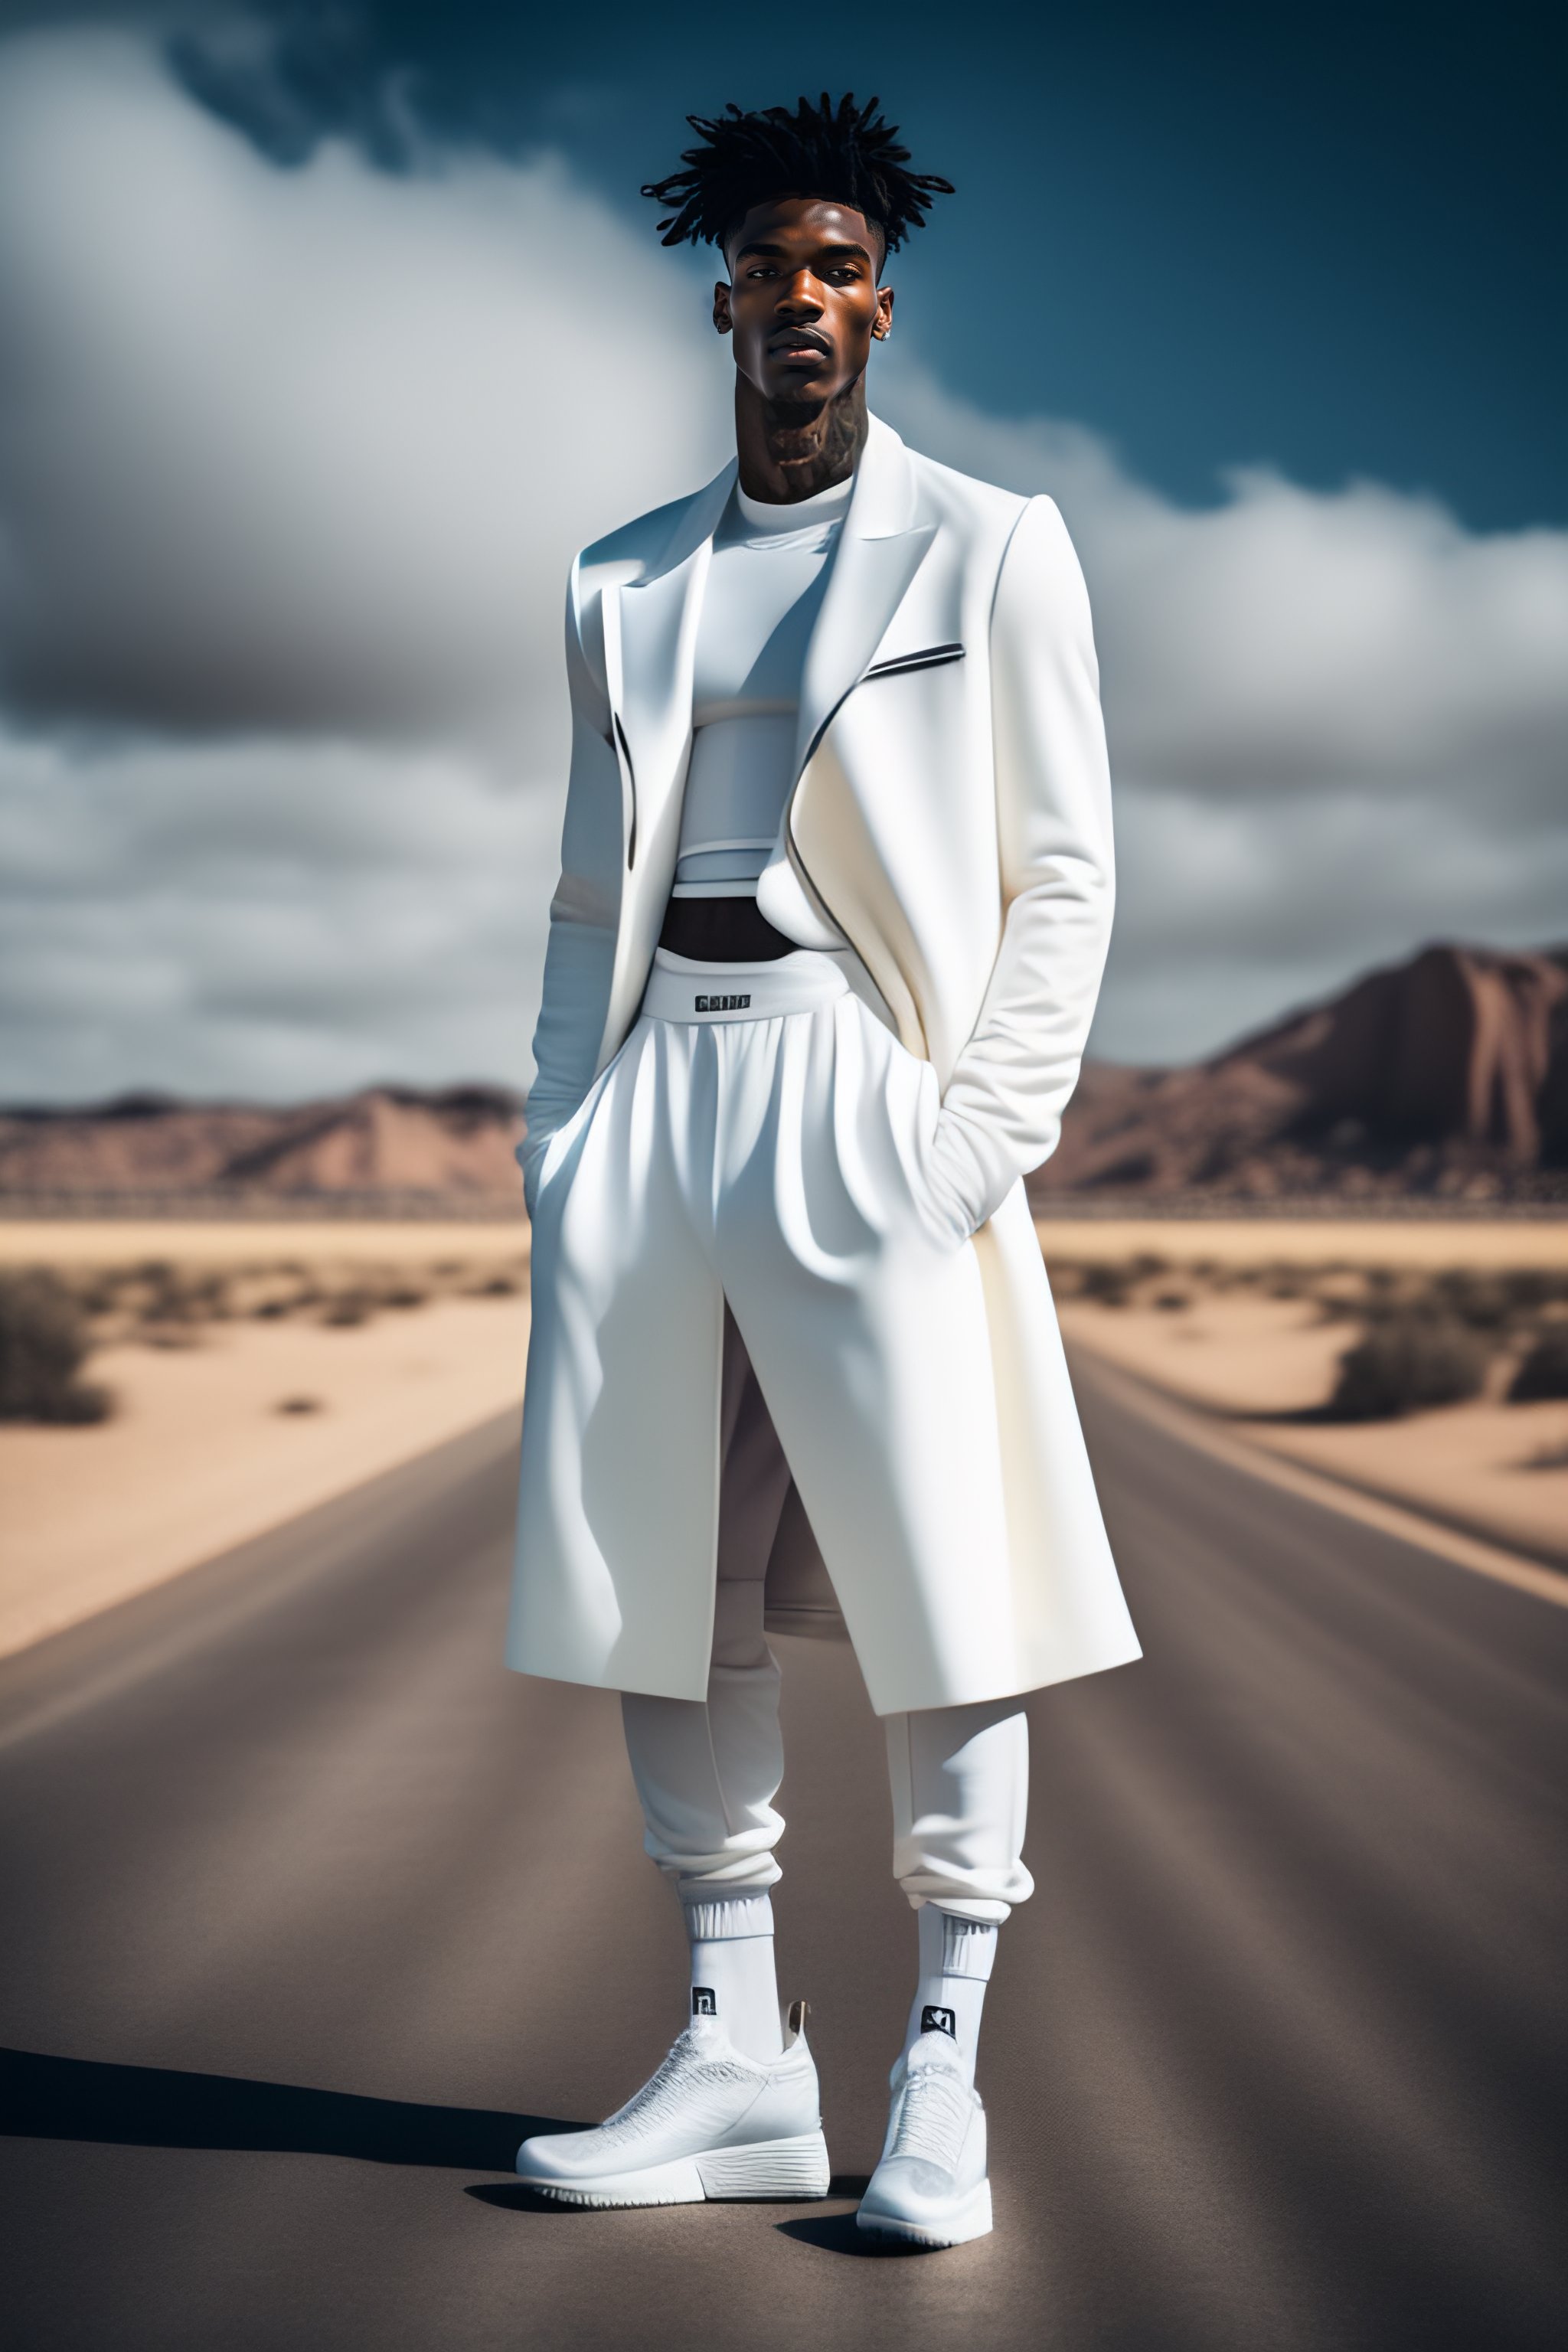 Lexica - Ja Morant basketball player handsome. Ultra hd! editorial, rick  owens model, white and chrome, structured outfit, platform shoes, iso 400,  s